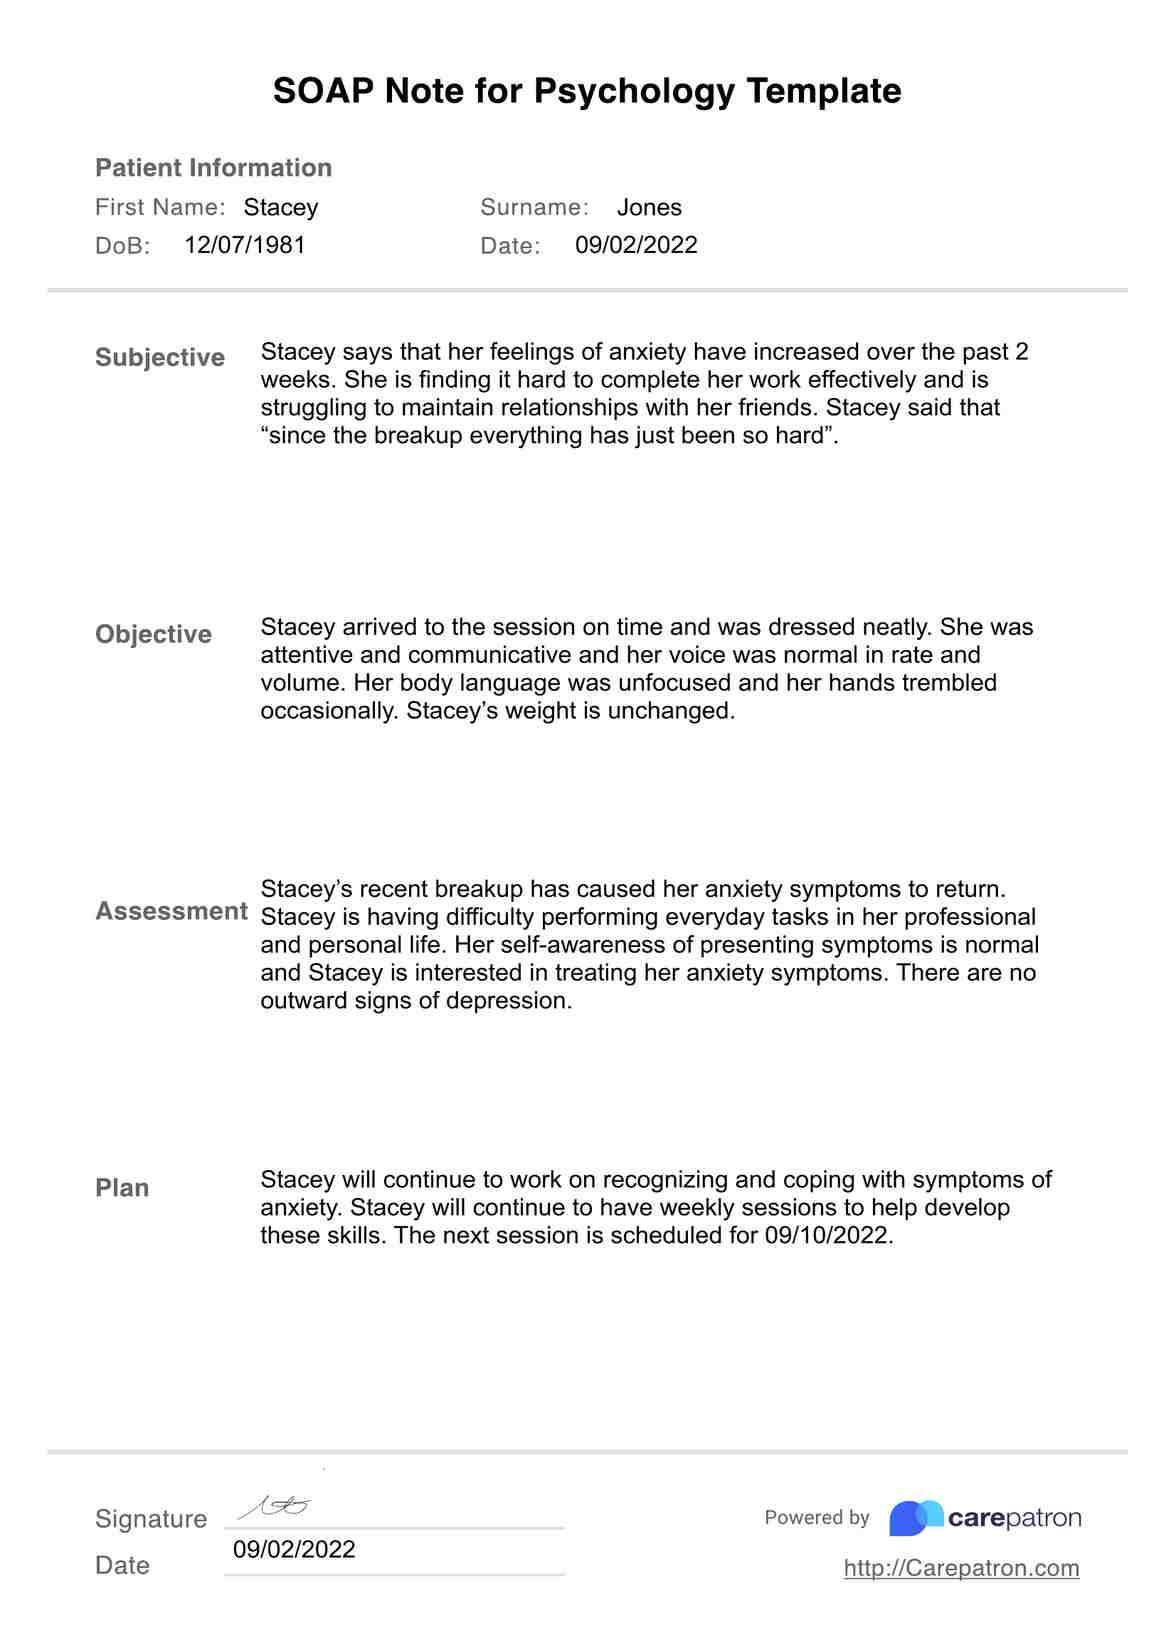 SOAP Notes for Psychology Template PDF Example